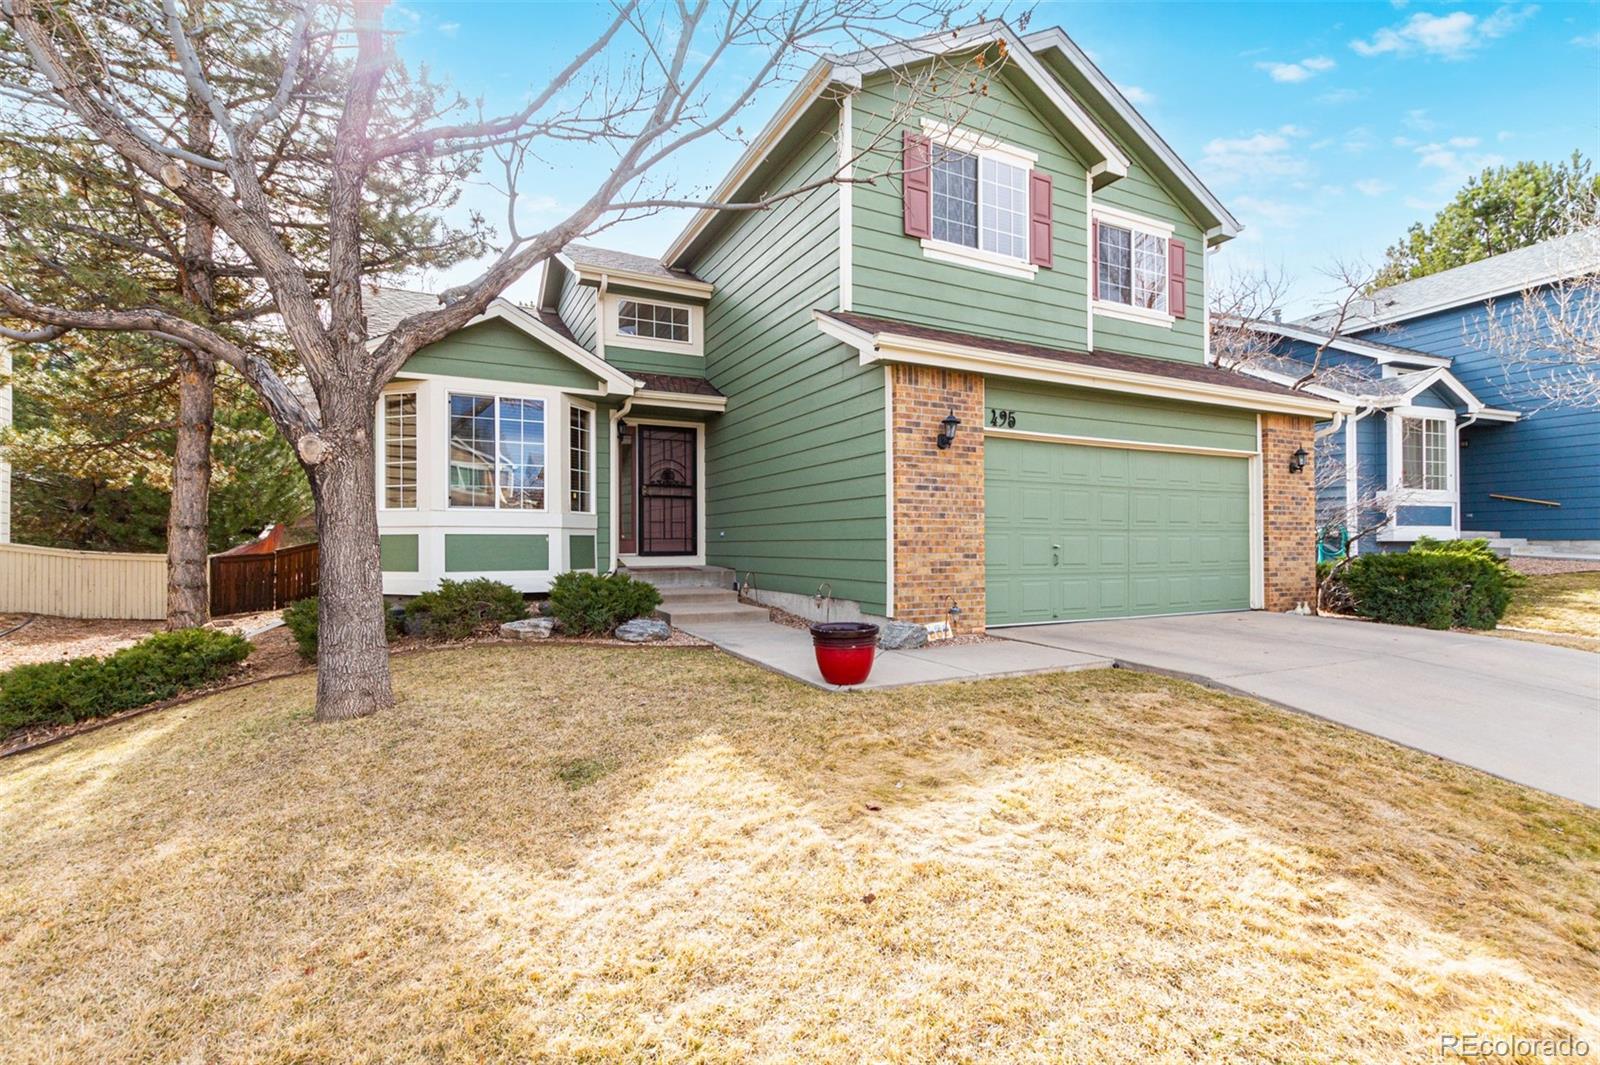 495  rose finch circle, Highlands Ranch sold home. Closed on 2024-04-12 for $667,000.